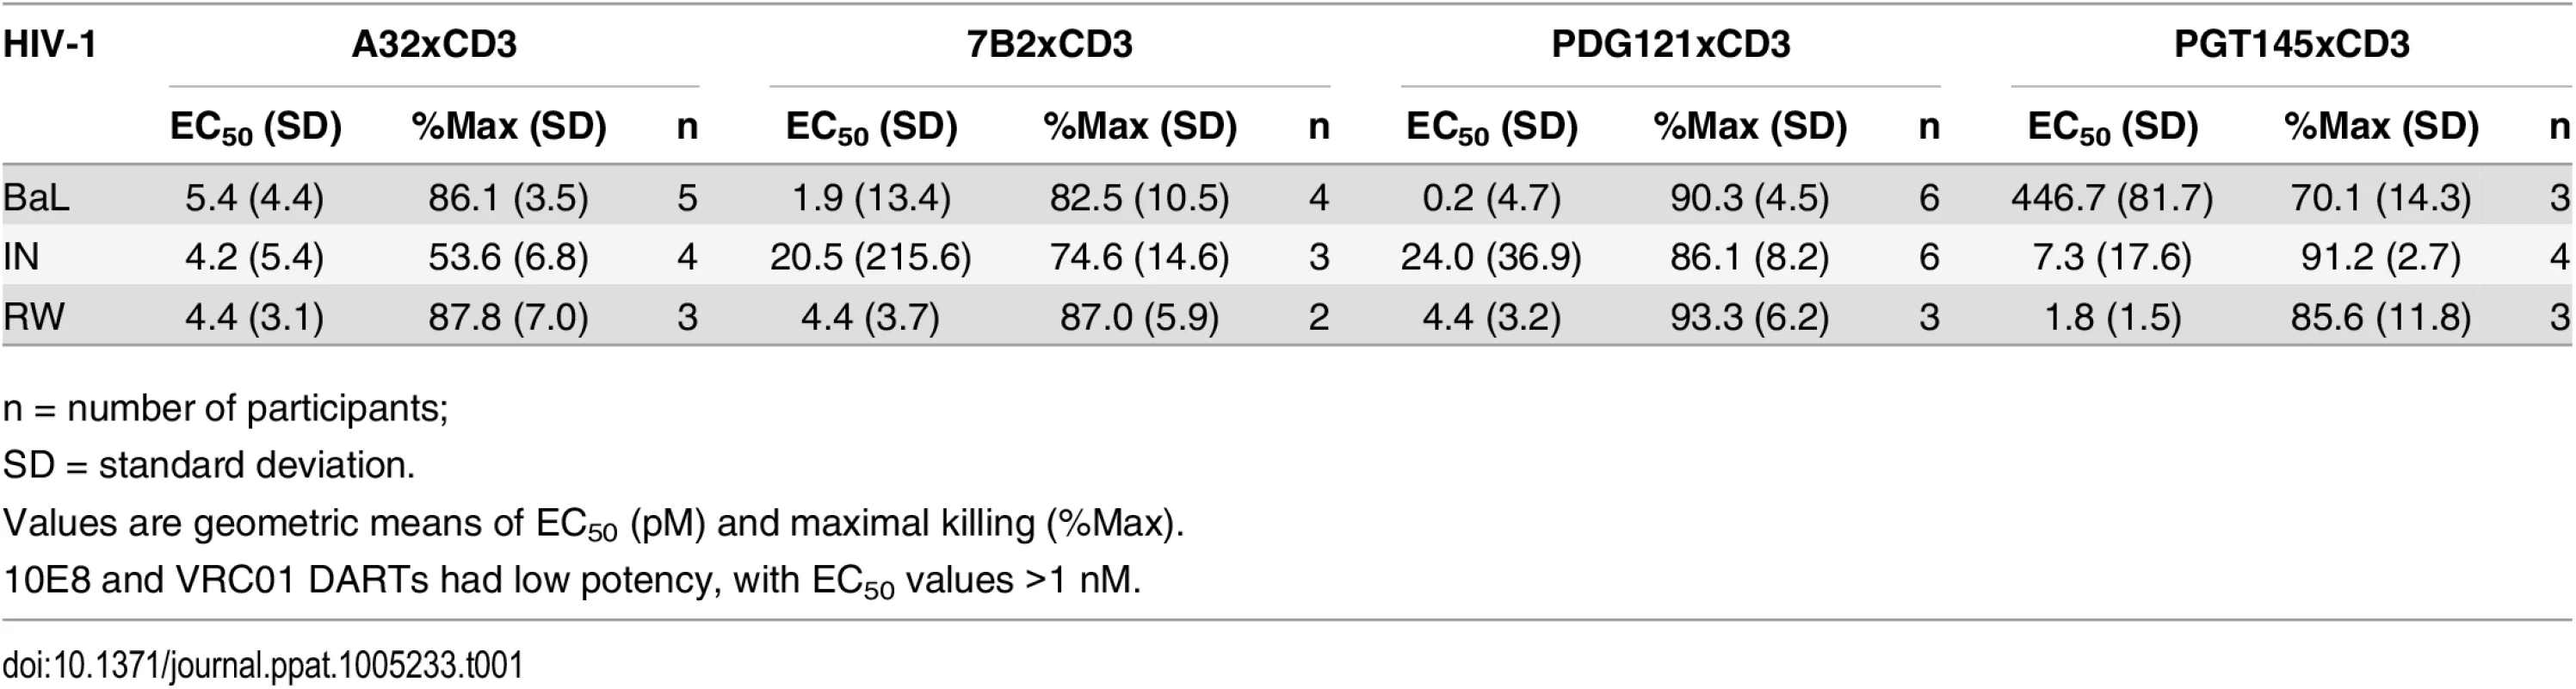 Summary of HIVxCD3 DART-mediated killing of HIV-1 infected CD4 T cells in vitro.